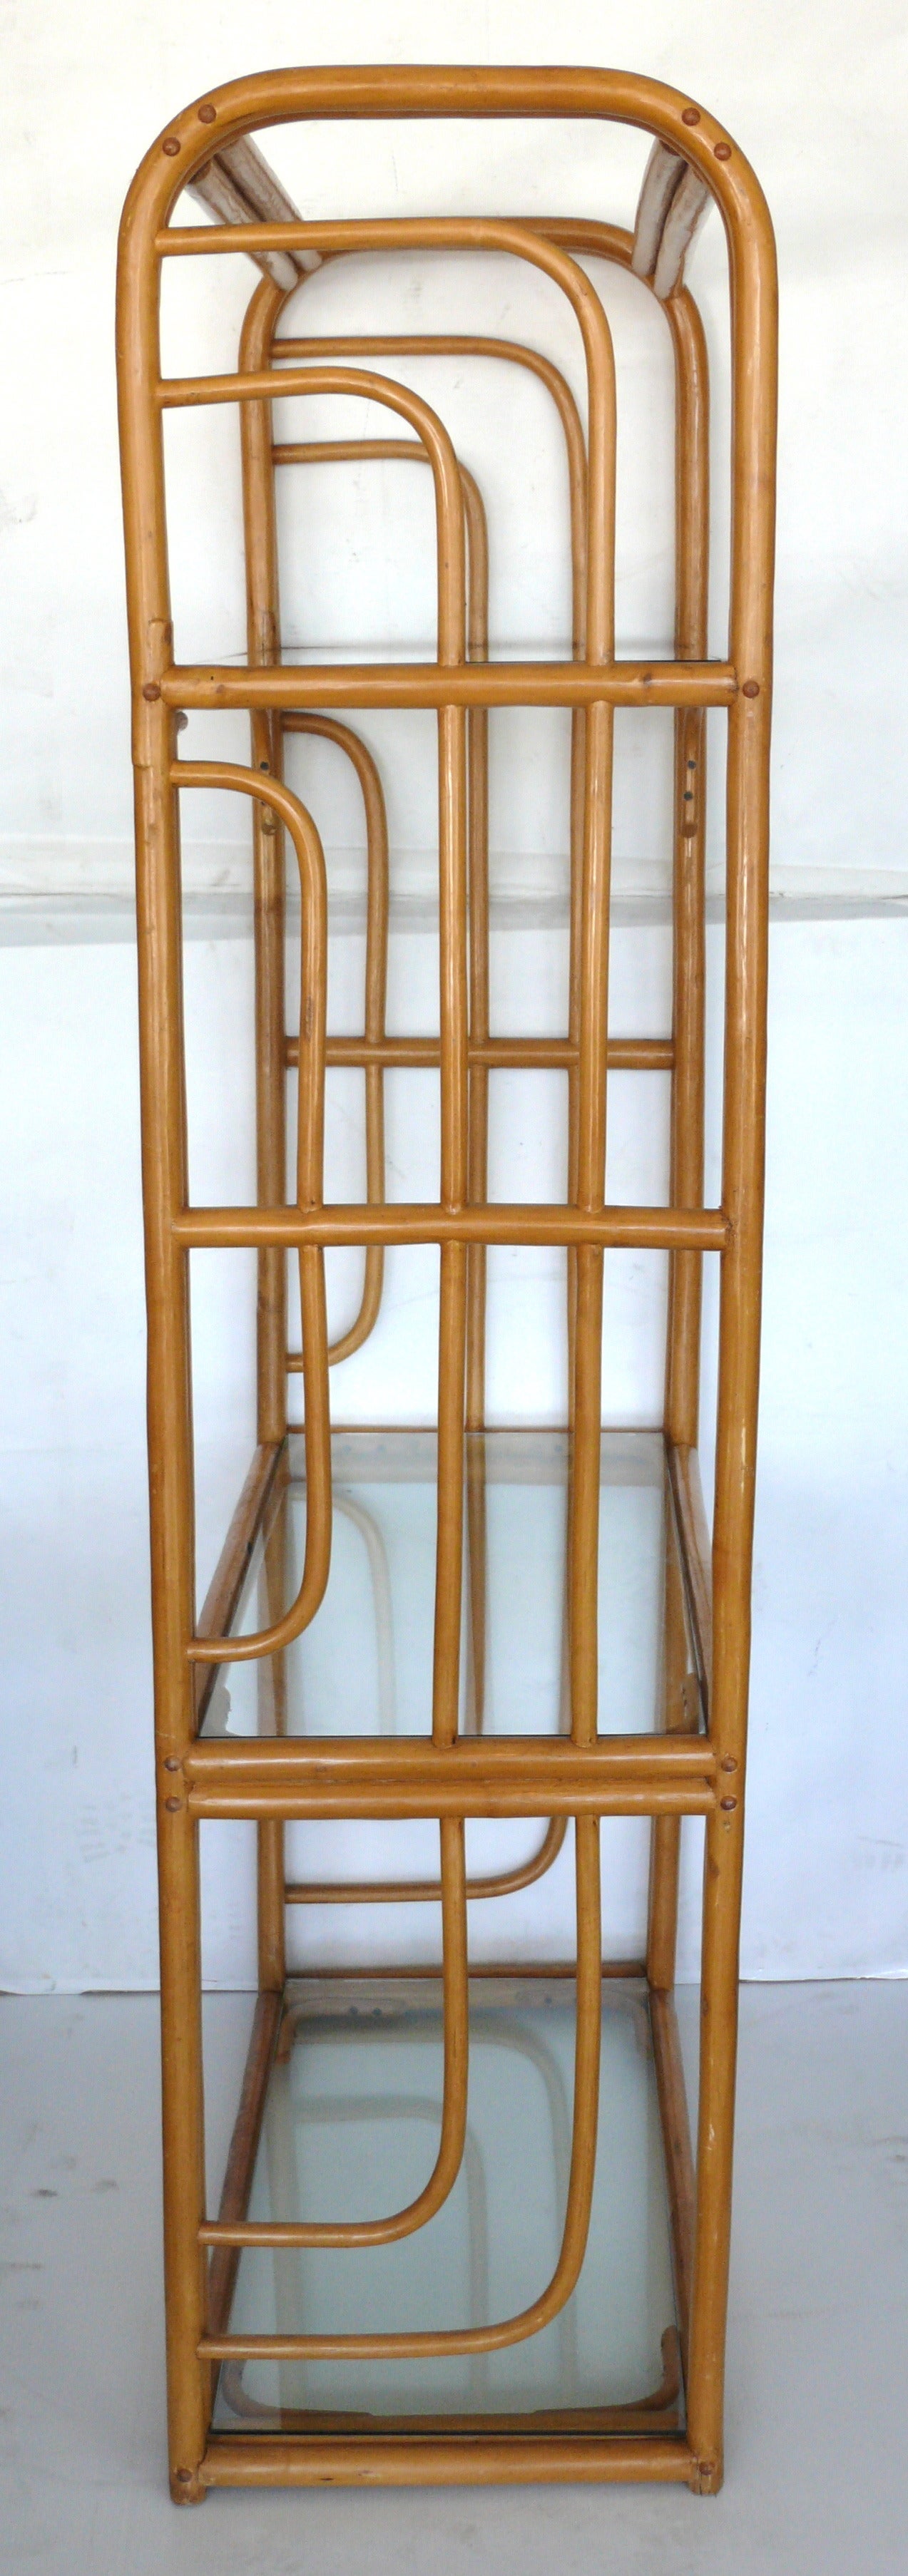 Fantastic pair of bamboo bookshelves. Three newly made glass shelves rest on bamboo frame. Great lines and clean design. Two available priced individually.